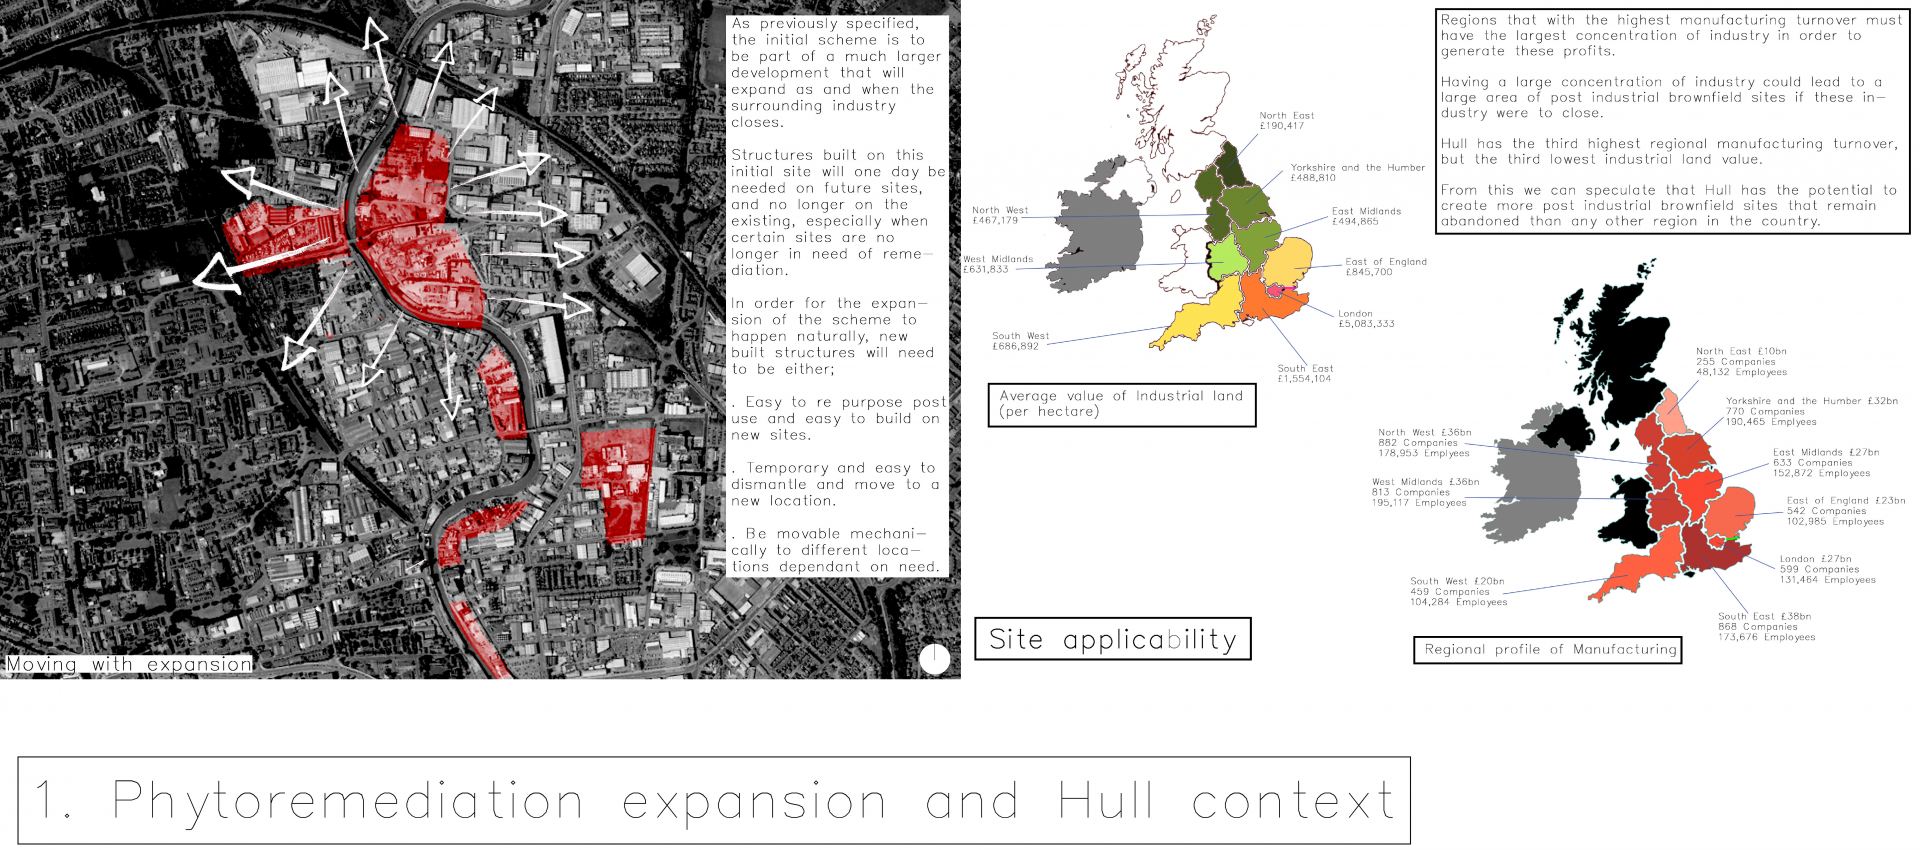 Phytoremediation is the use of plants to remediate soil. It takes a long time to achieve, but Hull is able to wait. The site of British Extraction Co silo will act as the initial site.